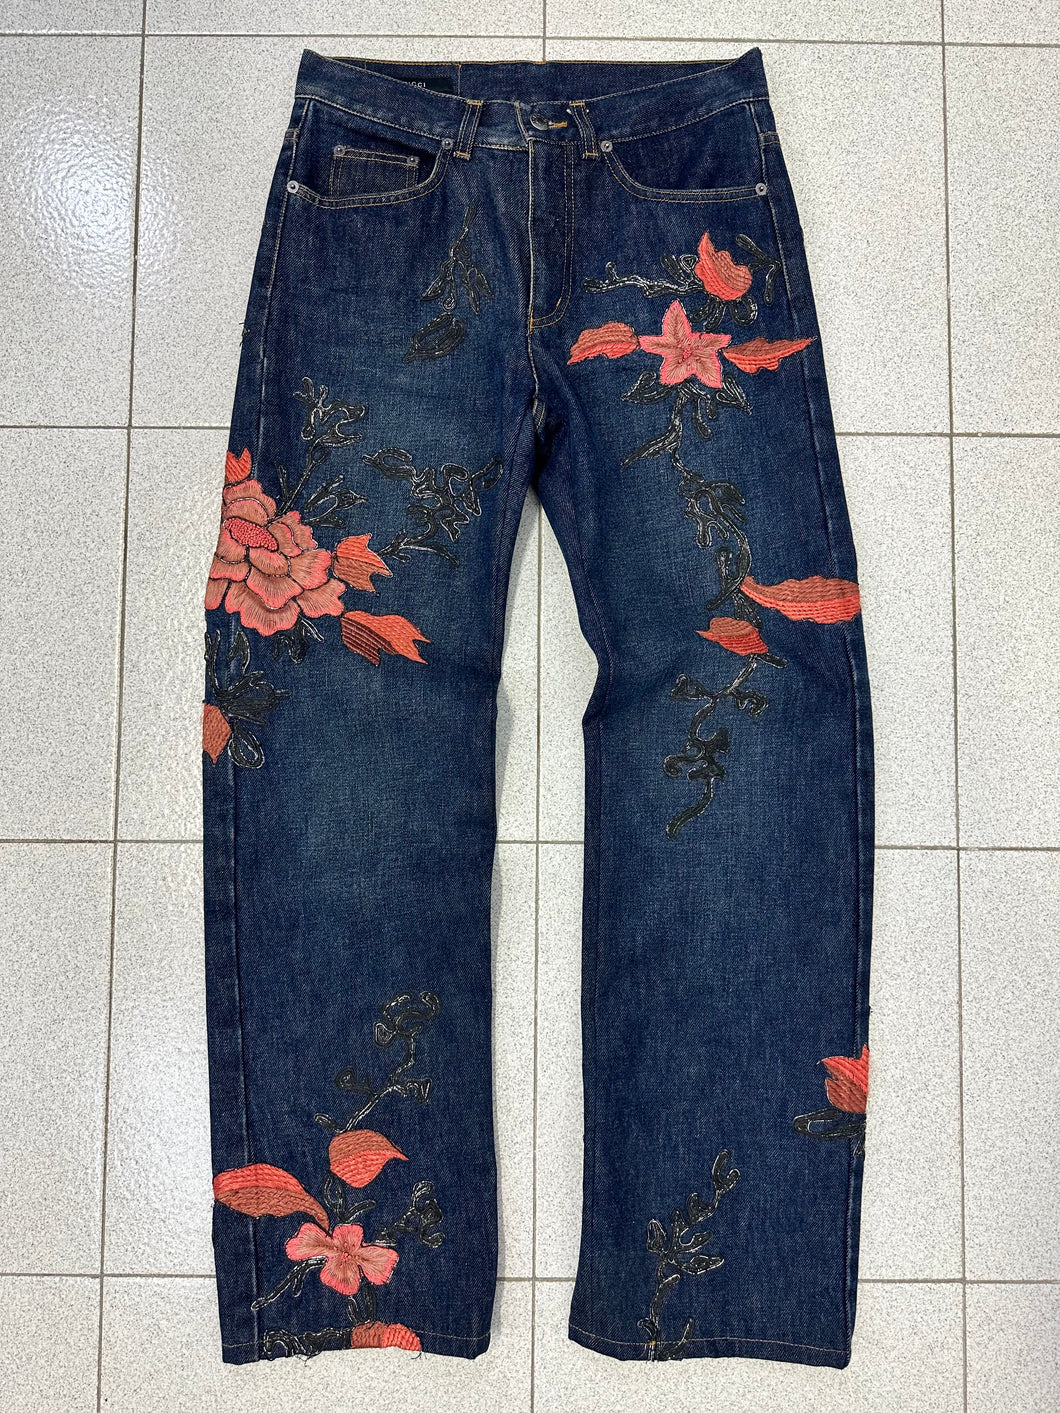 AW1999 Gucci by Tom Ford floral embroidered denim